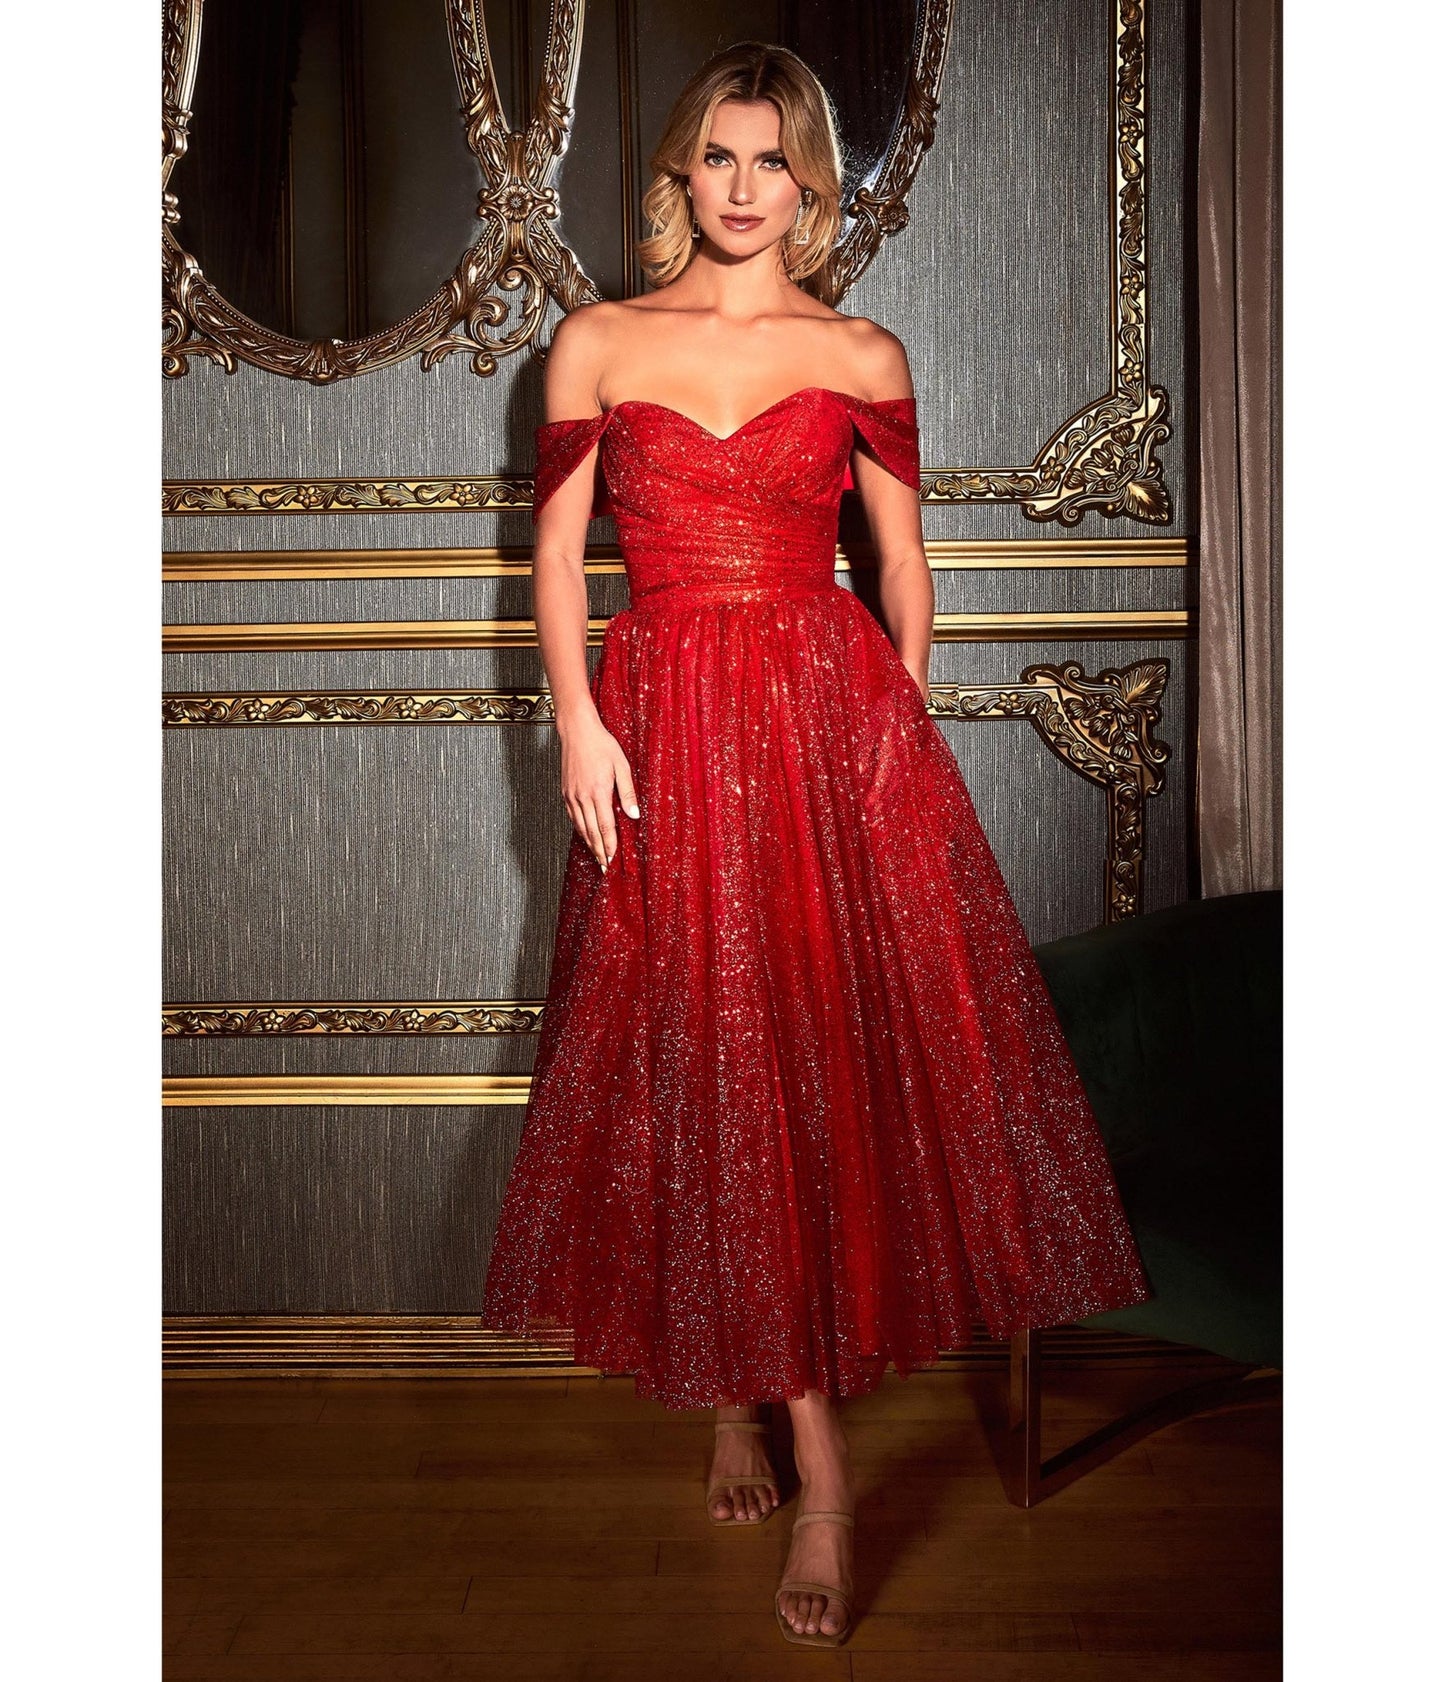 Shiny Red Tulle Off the Shoulder Tea Length Prom Dress, Off